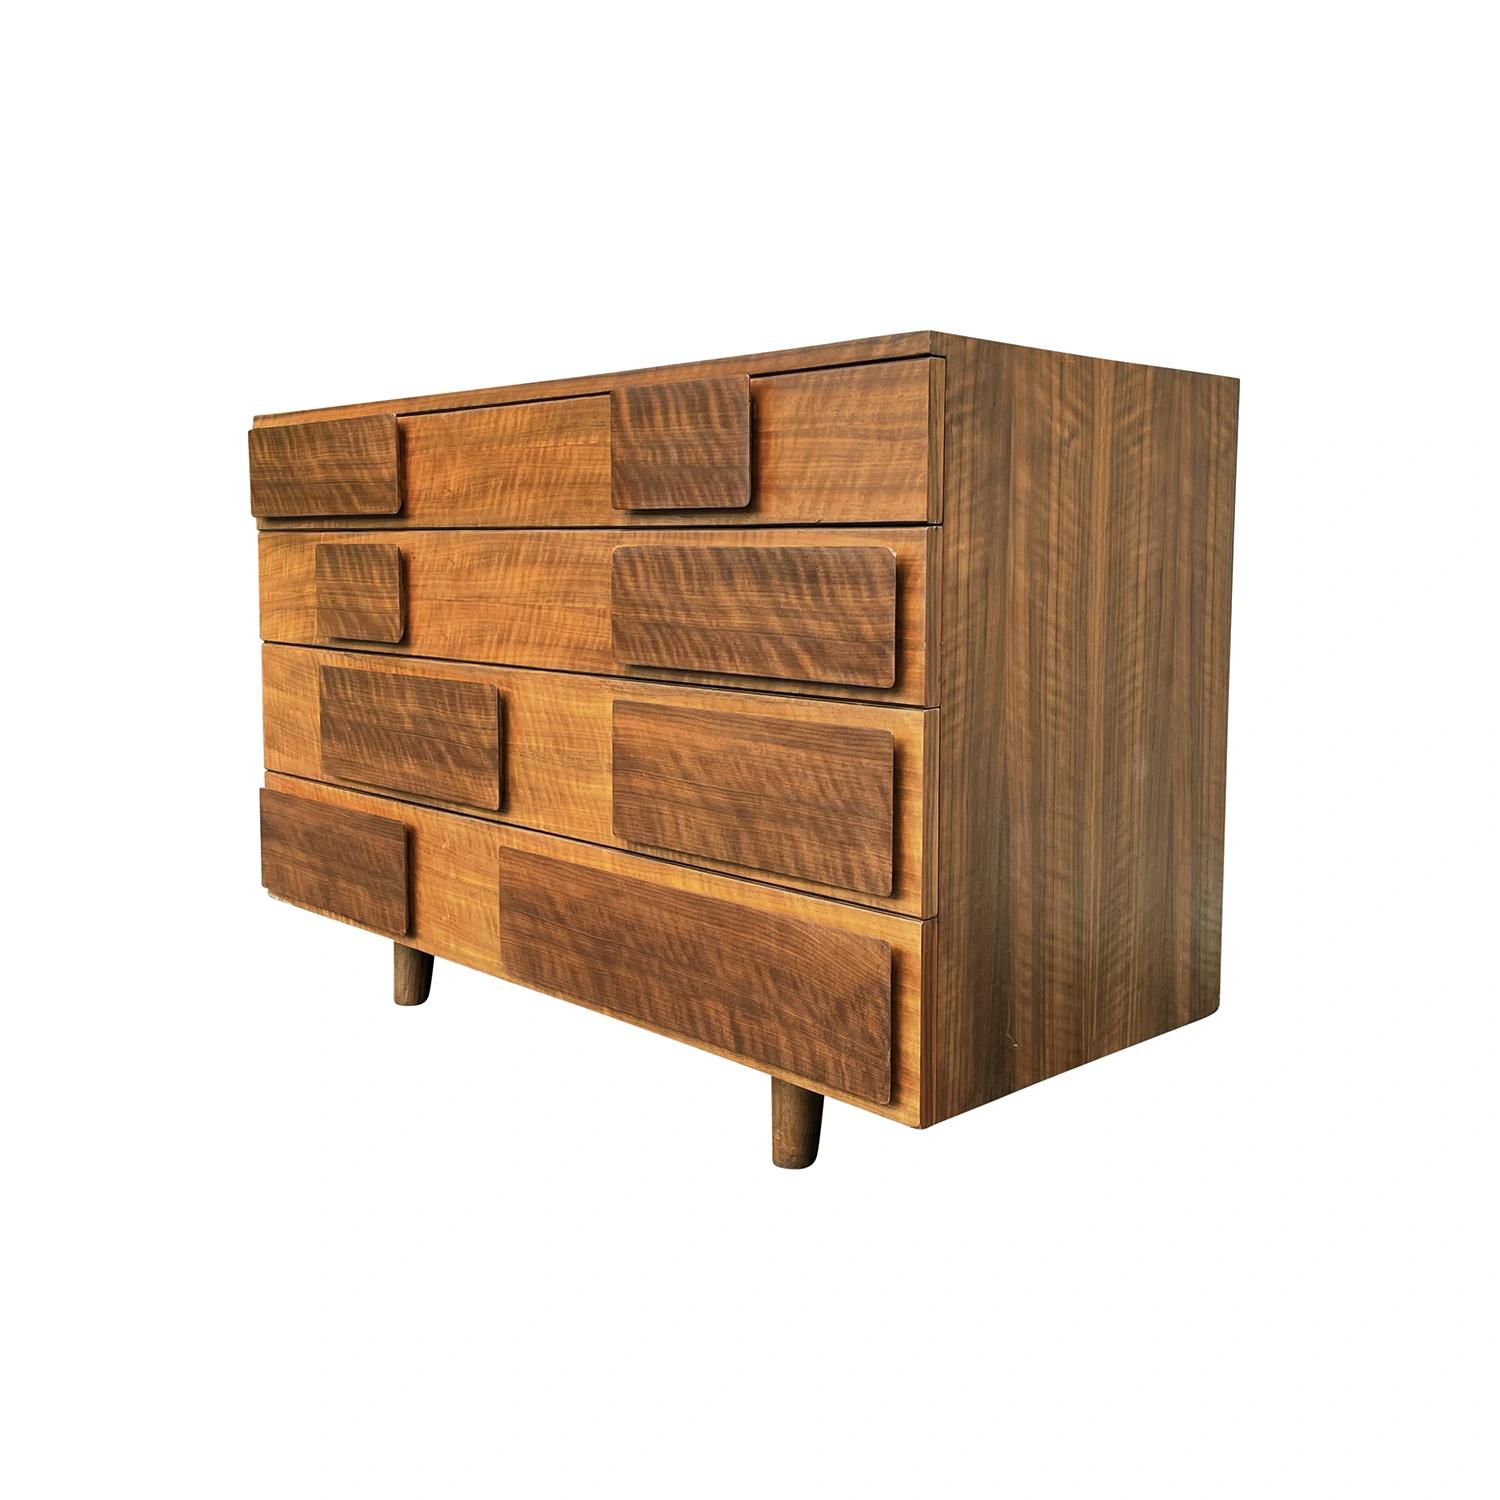 Hand-Carved 20th Century Brown Italian Walnut M. Singer & Sons Dresser, Cabinet by Gio Ponti For Sale